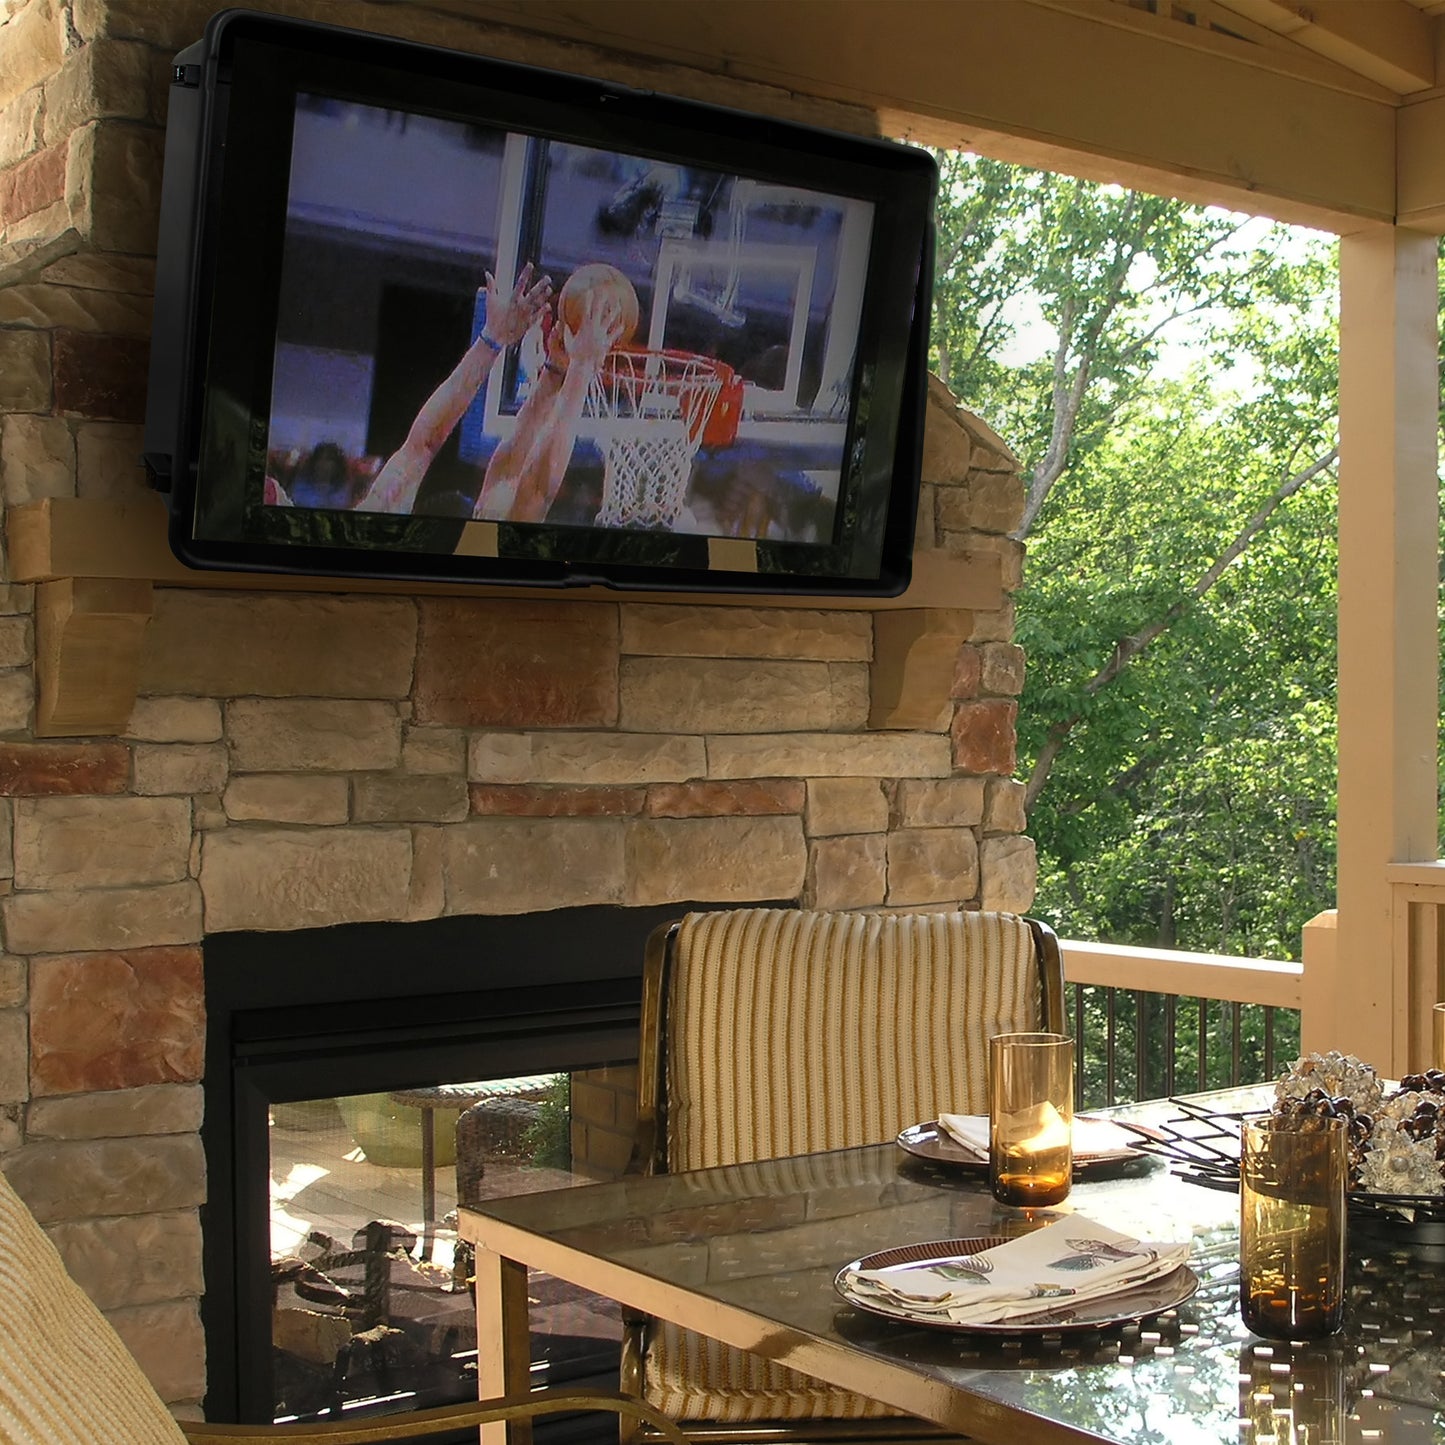 TV cover outdoors under patio: Weather proof TV cover under a patio covering open with tv on.